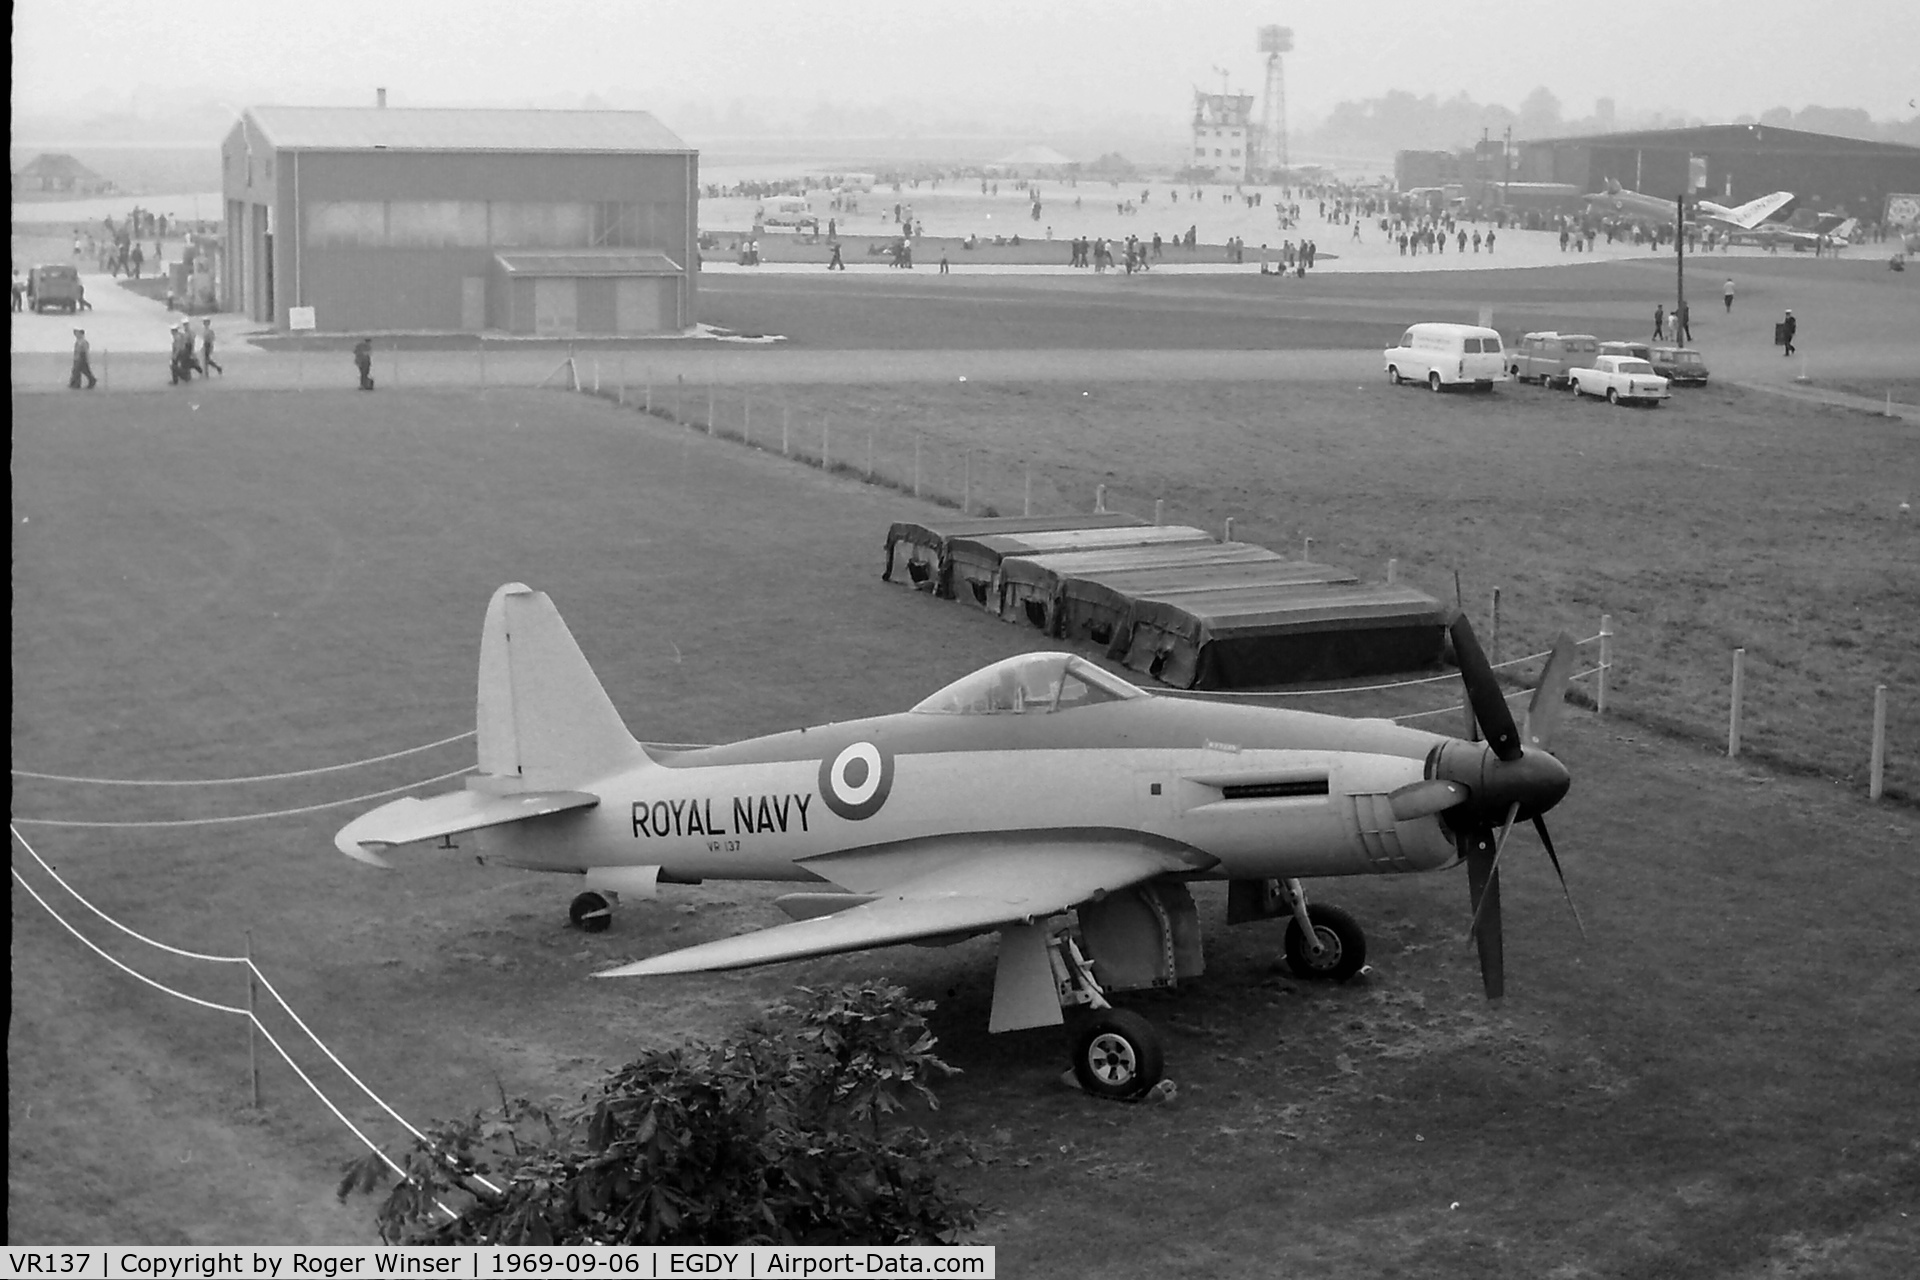 VR137, 1947 Westland Wyvern TF1 C/N Not known, Pre-production Westland W.34 Wyvern. Fitted with a Rolls-Royce Eagle 24 cylinder H-block piston engine. Never flown and not delivered to the RN. Seen outside the Fleet Air Arm Museum hangars circa 1969